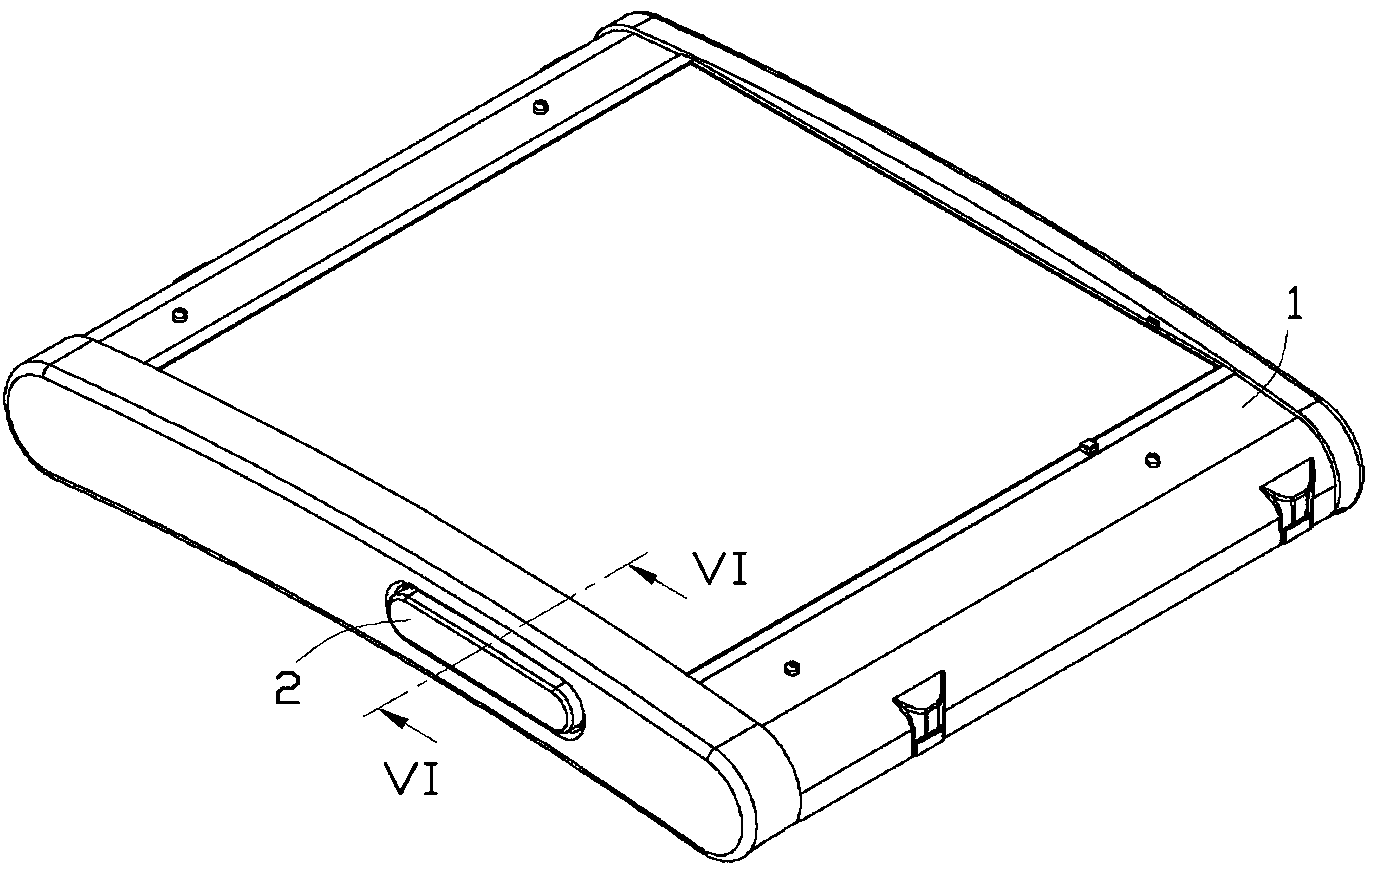 Press key and electronic device with same